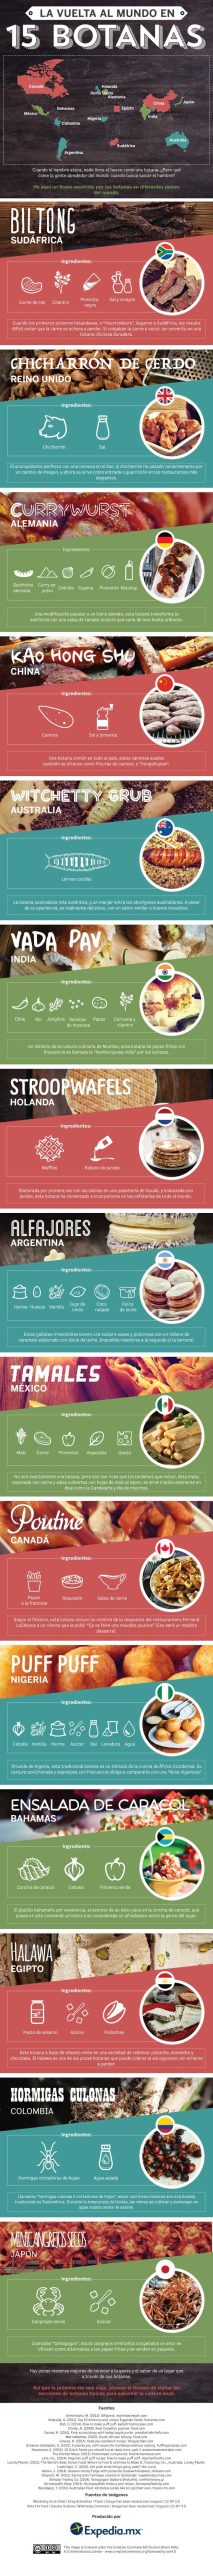 Around-the-world-in-15-snacks (Mexican Spanish)